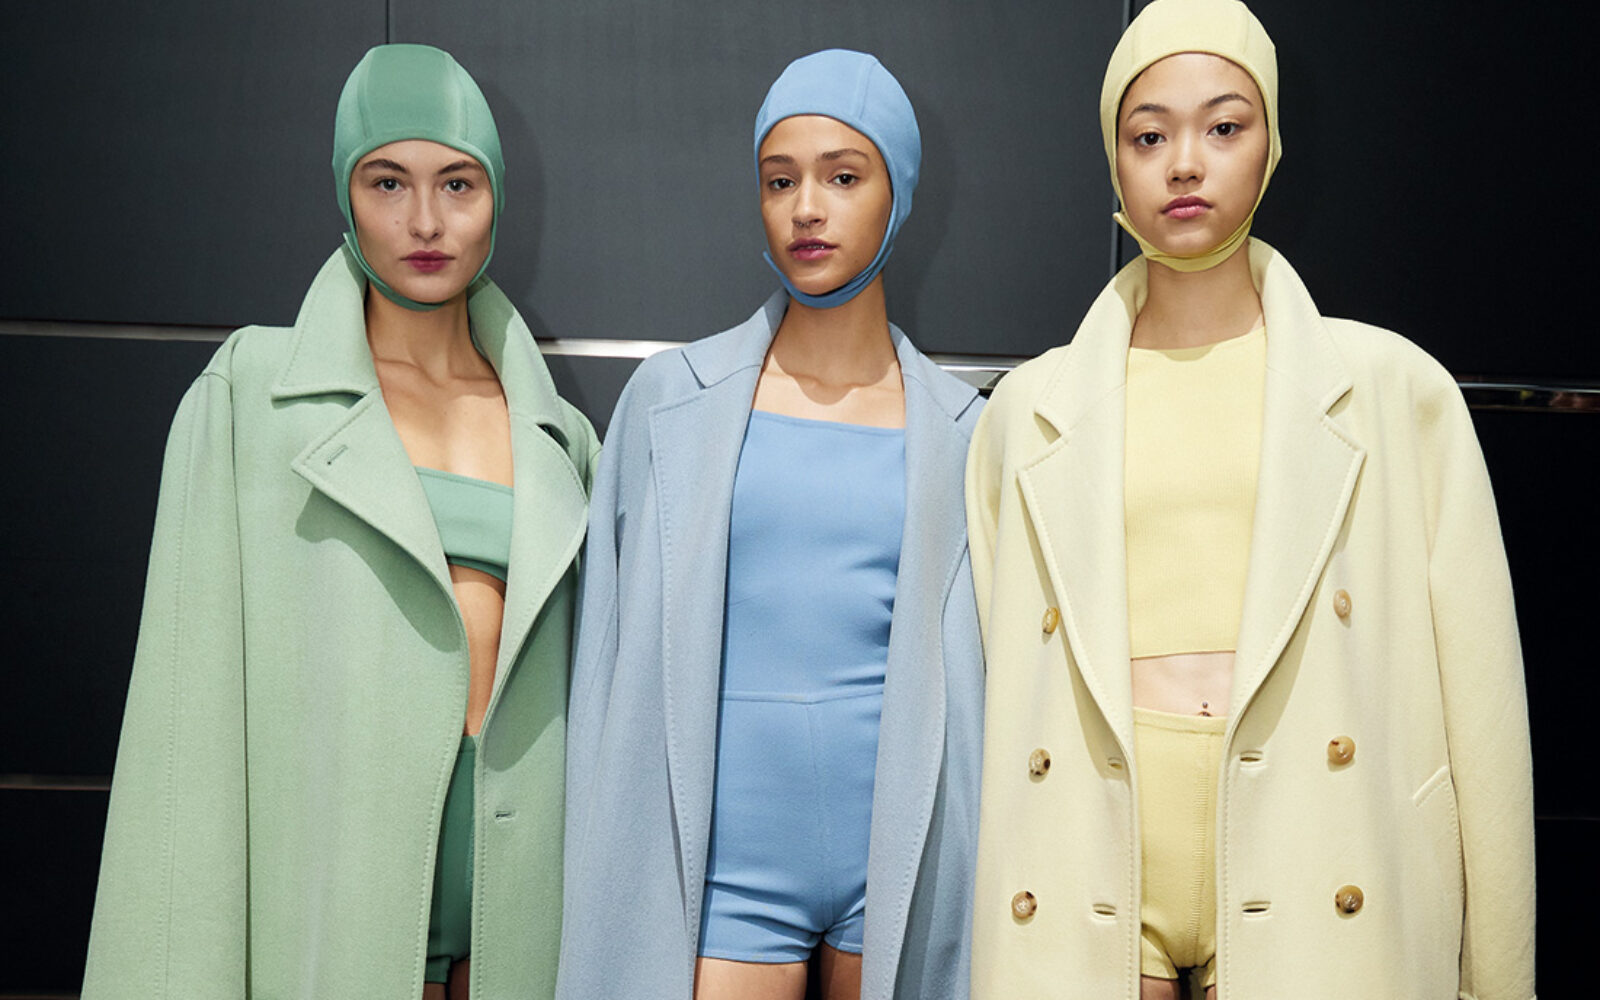 Ten Minutes With Max Mara Creative Director Ian Griffiths - MOJEH